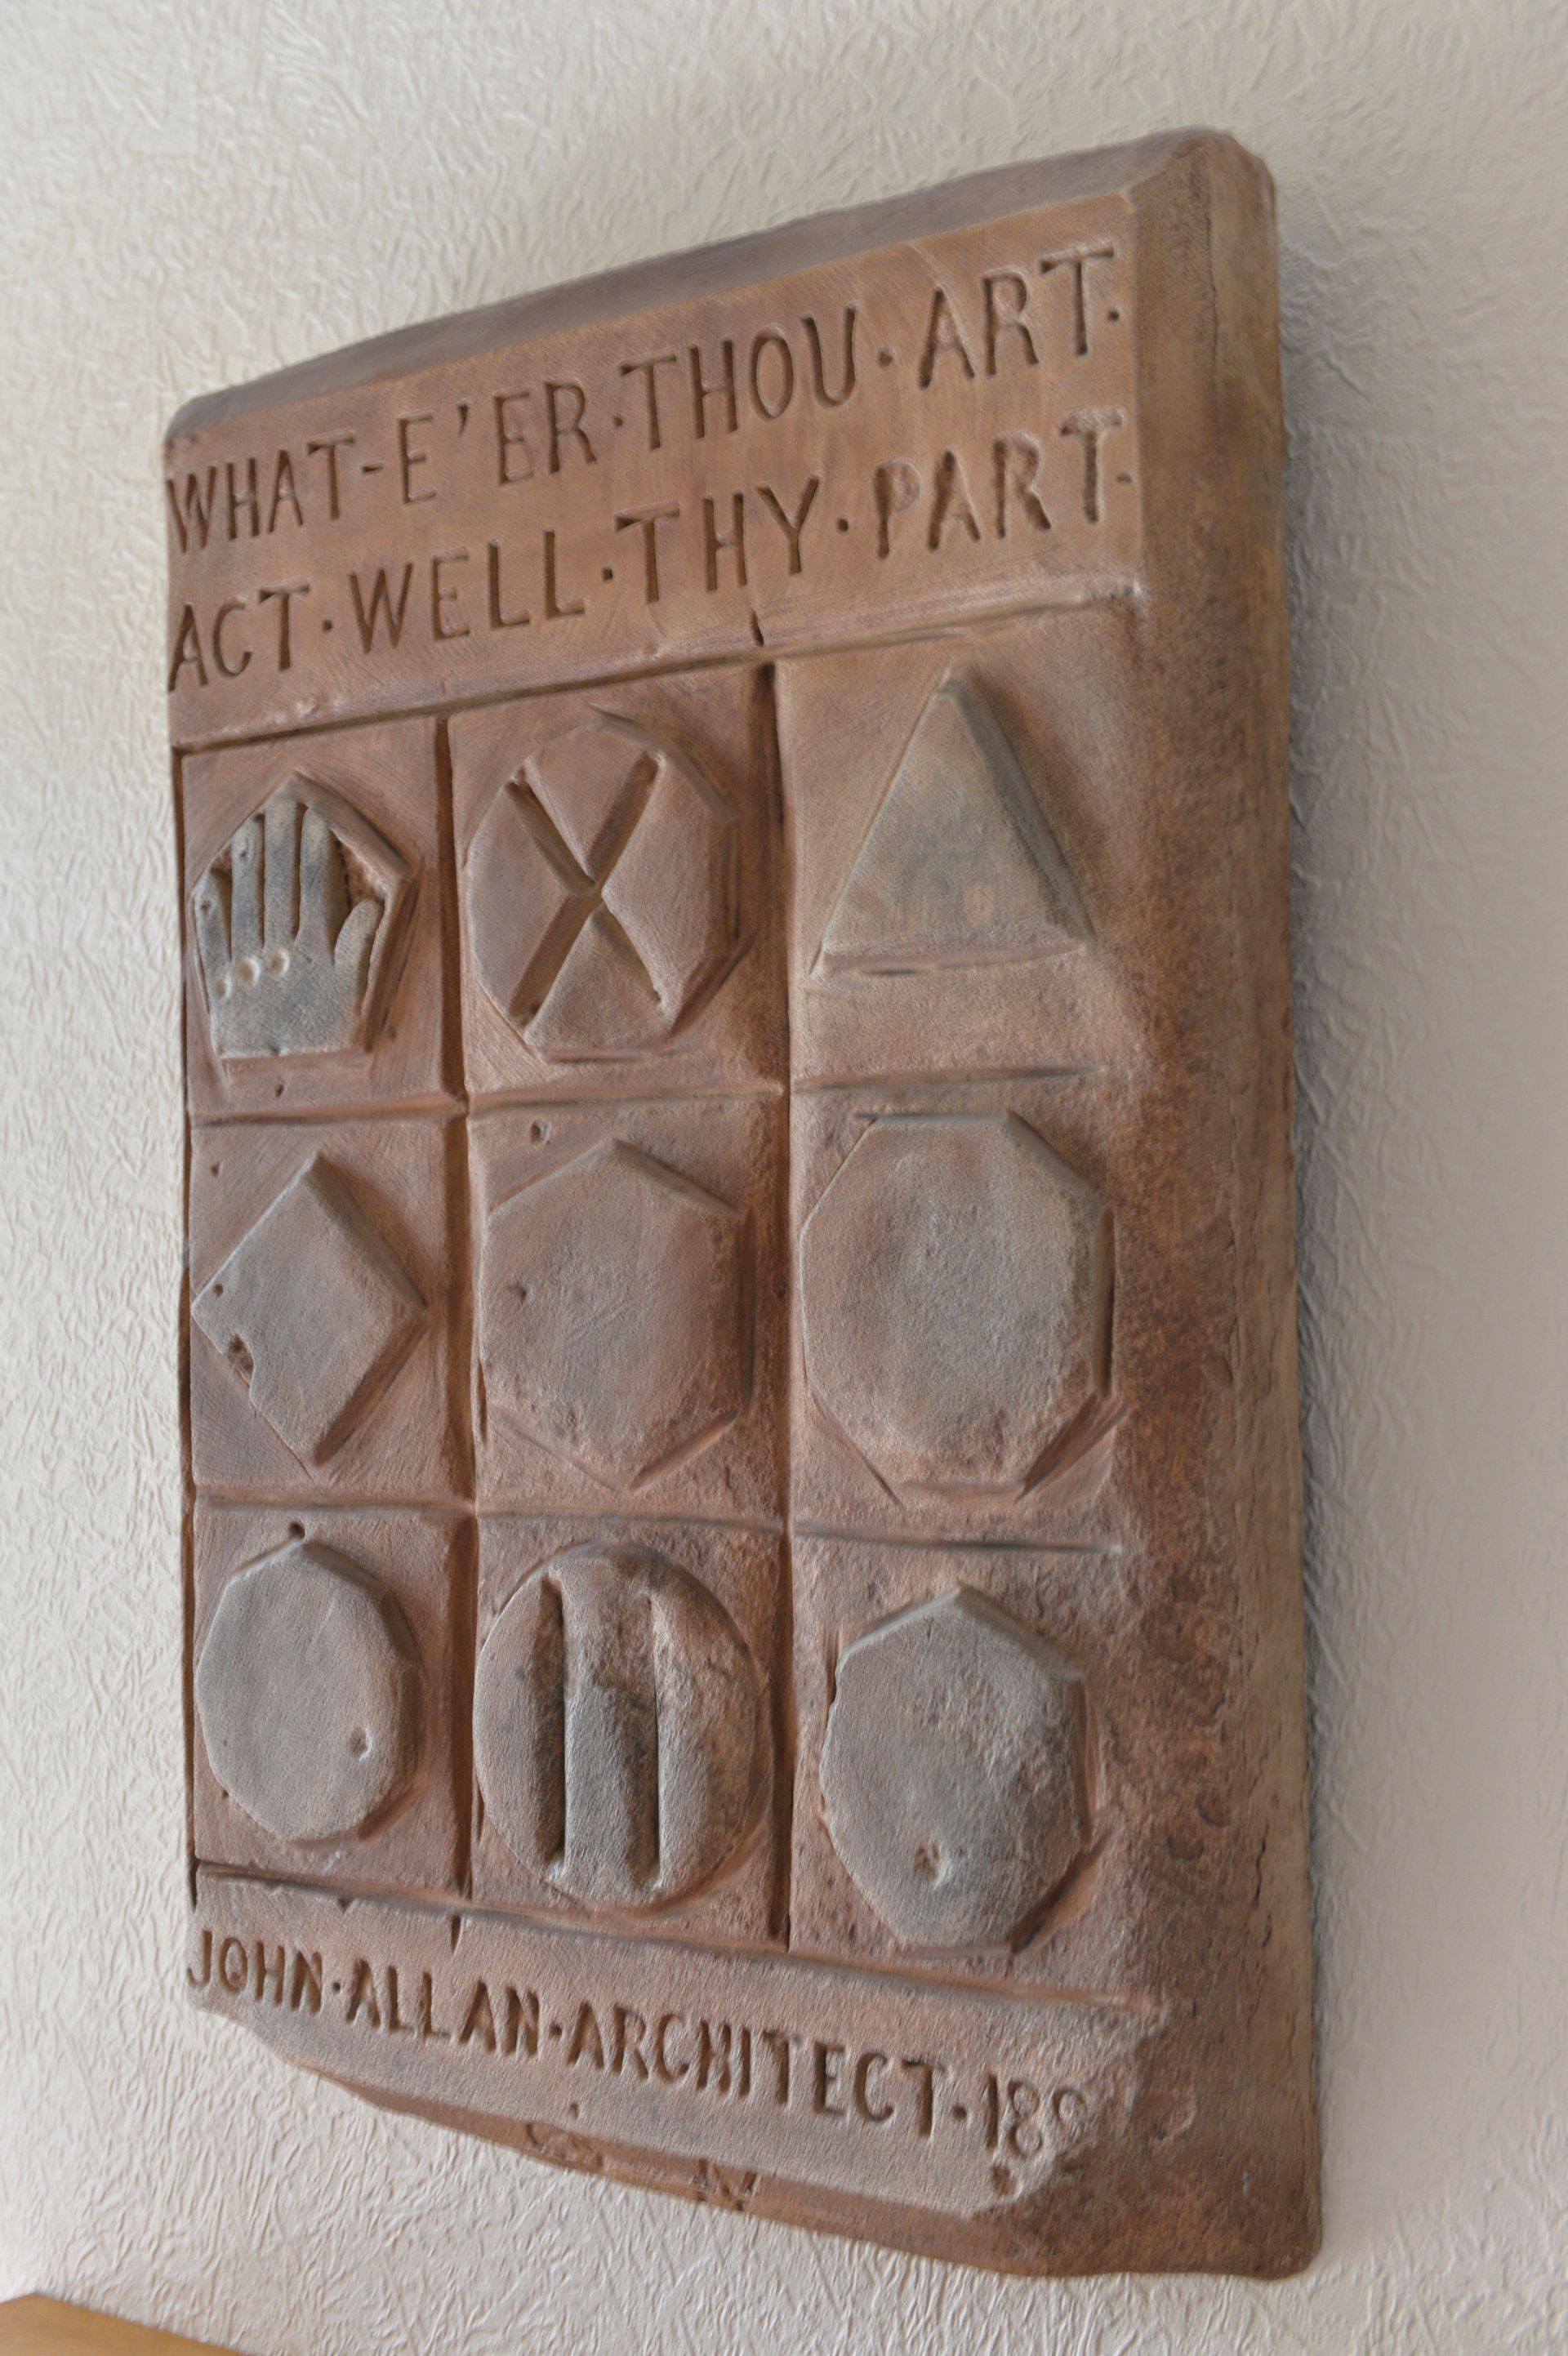 A replica of the plaque with the statement “What E’er Thou Art, Act Well Thy Part.”